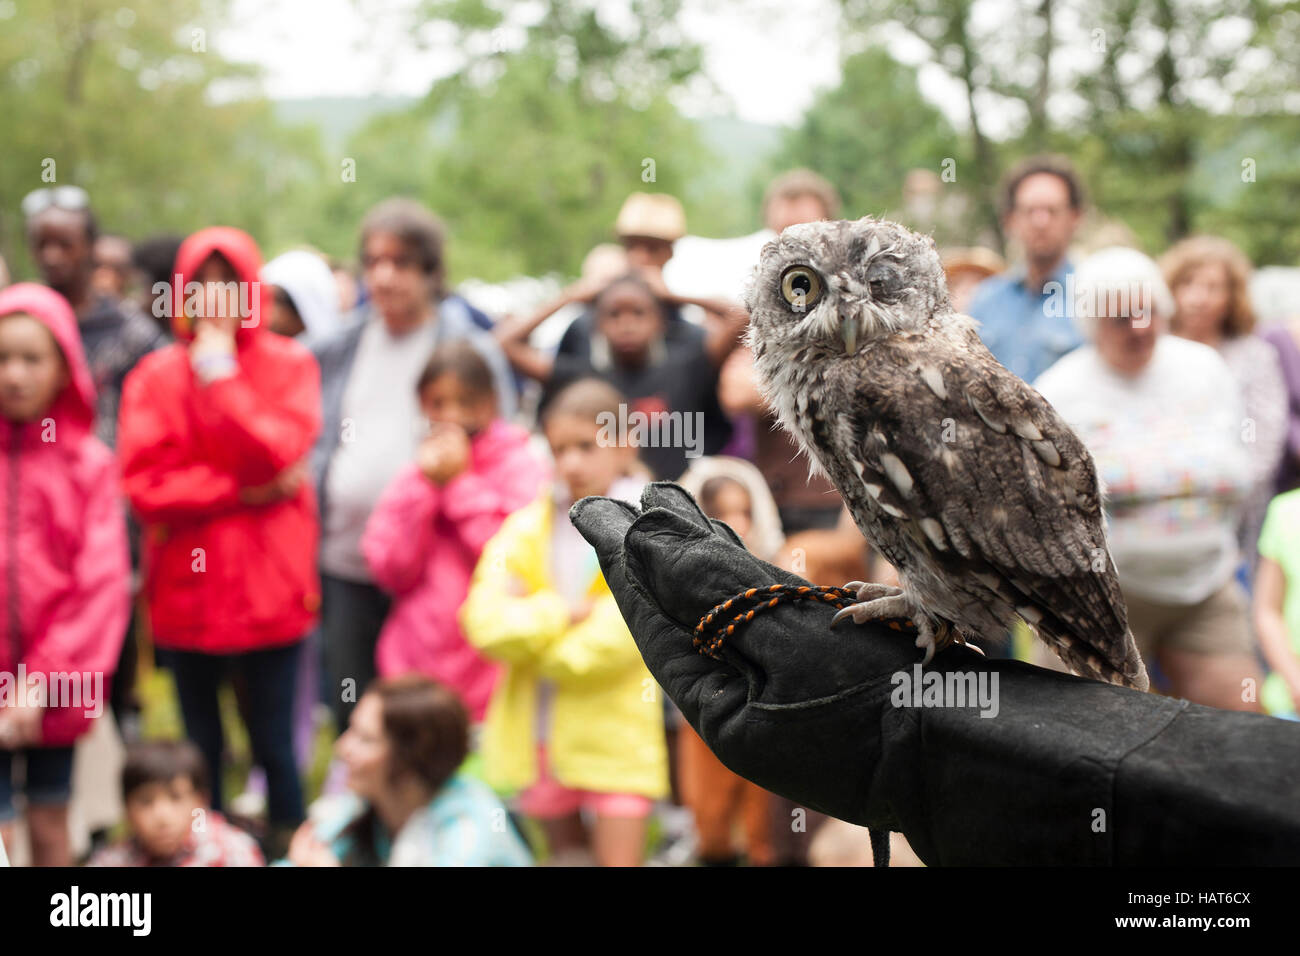 Silent Wings Raptor Rehab and Education of New York presents live bird demonstration at Austerlitz, NY Blueberry Festival. Stock Photo